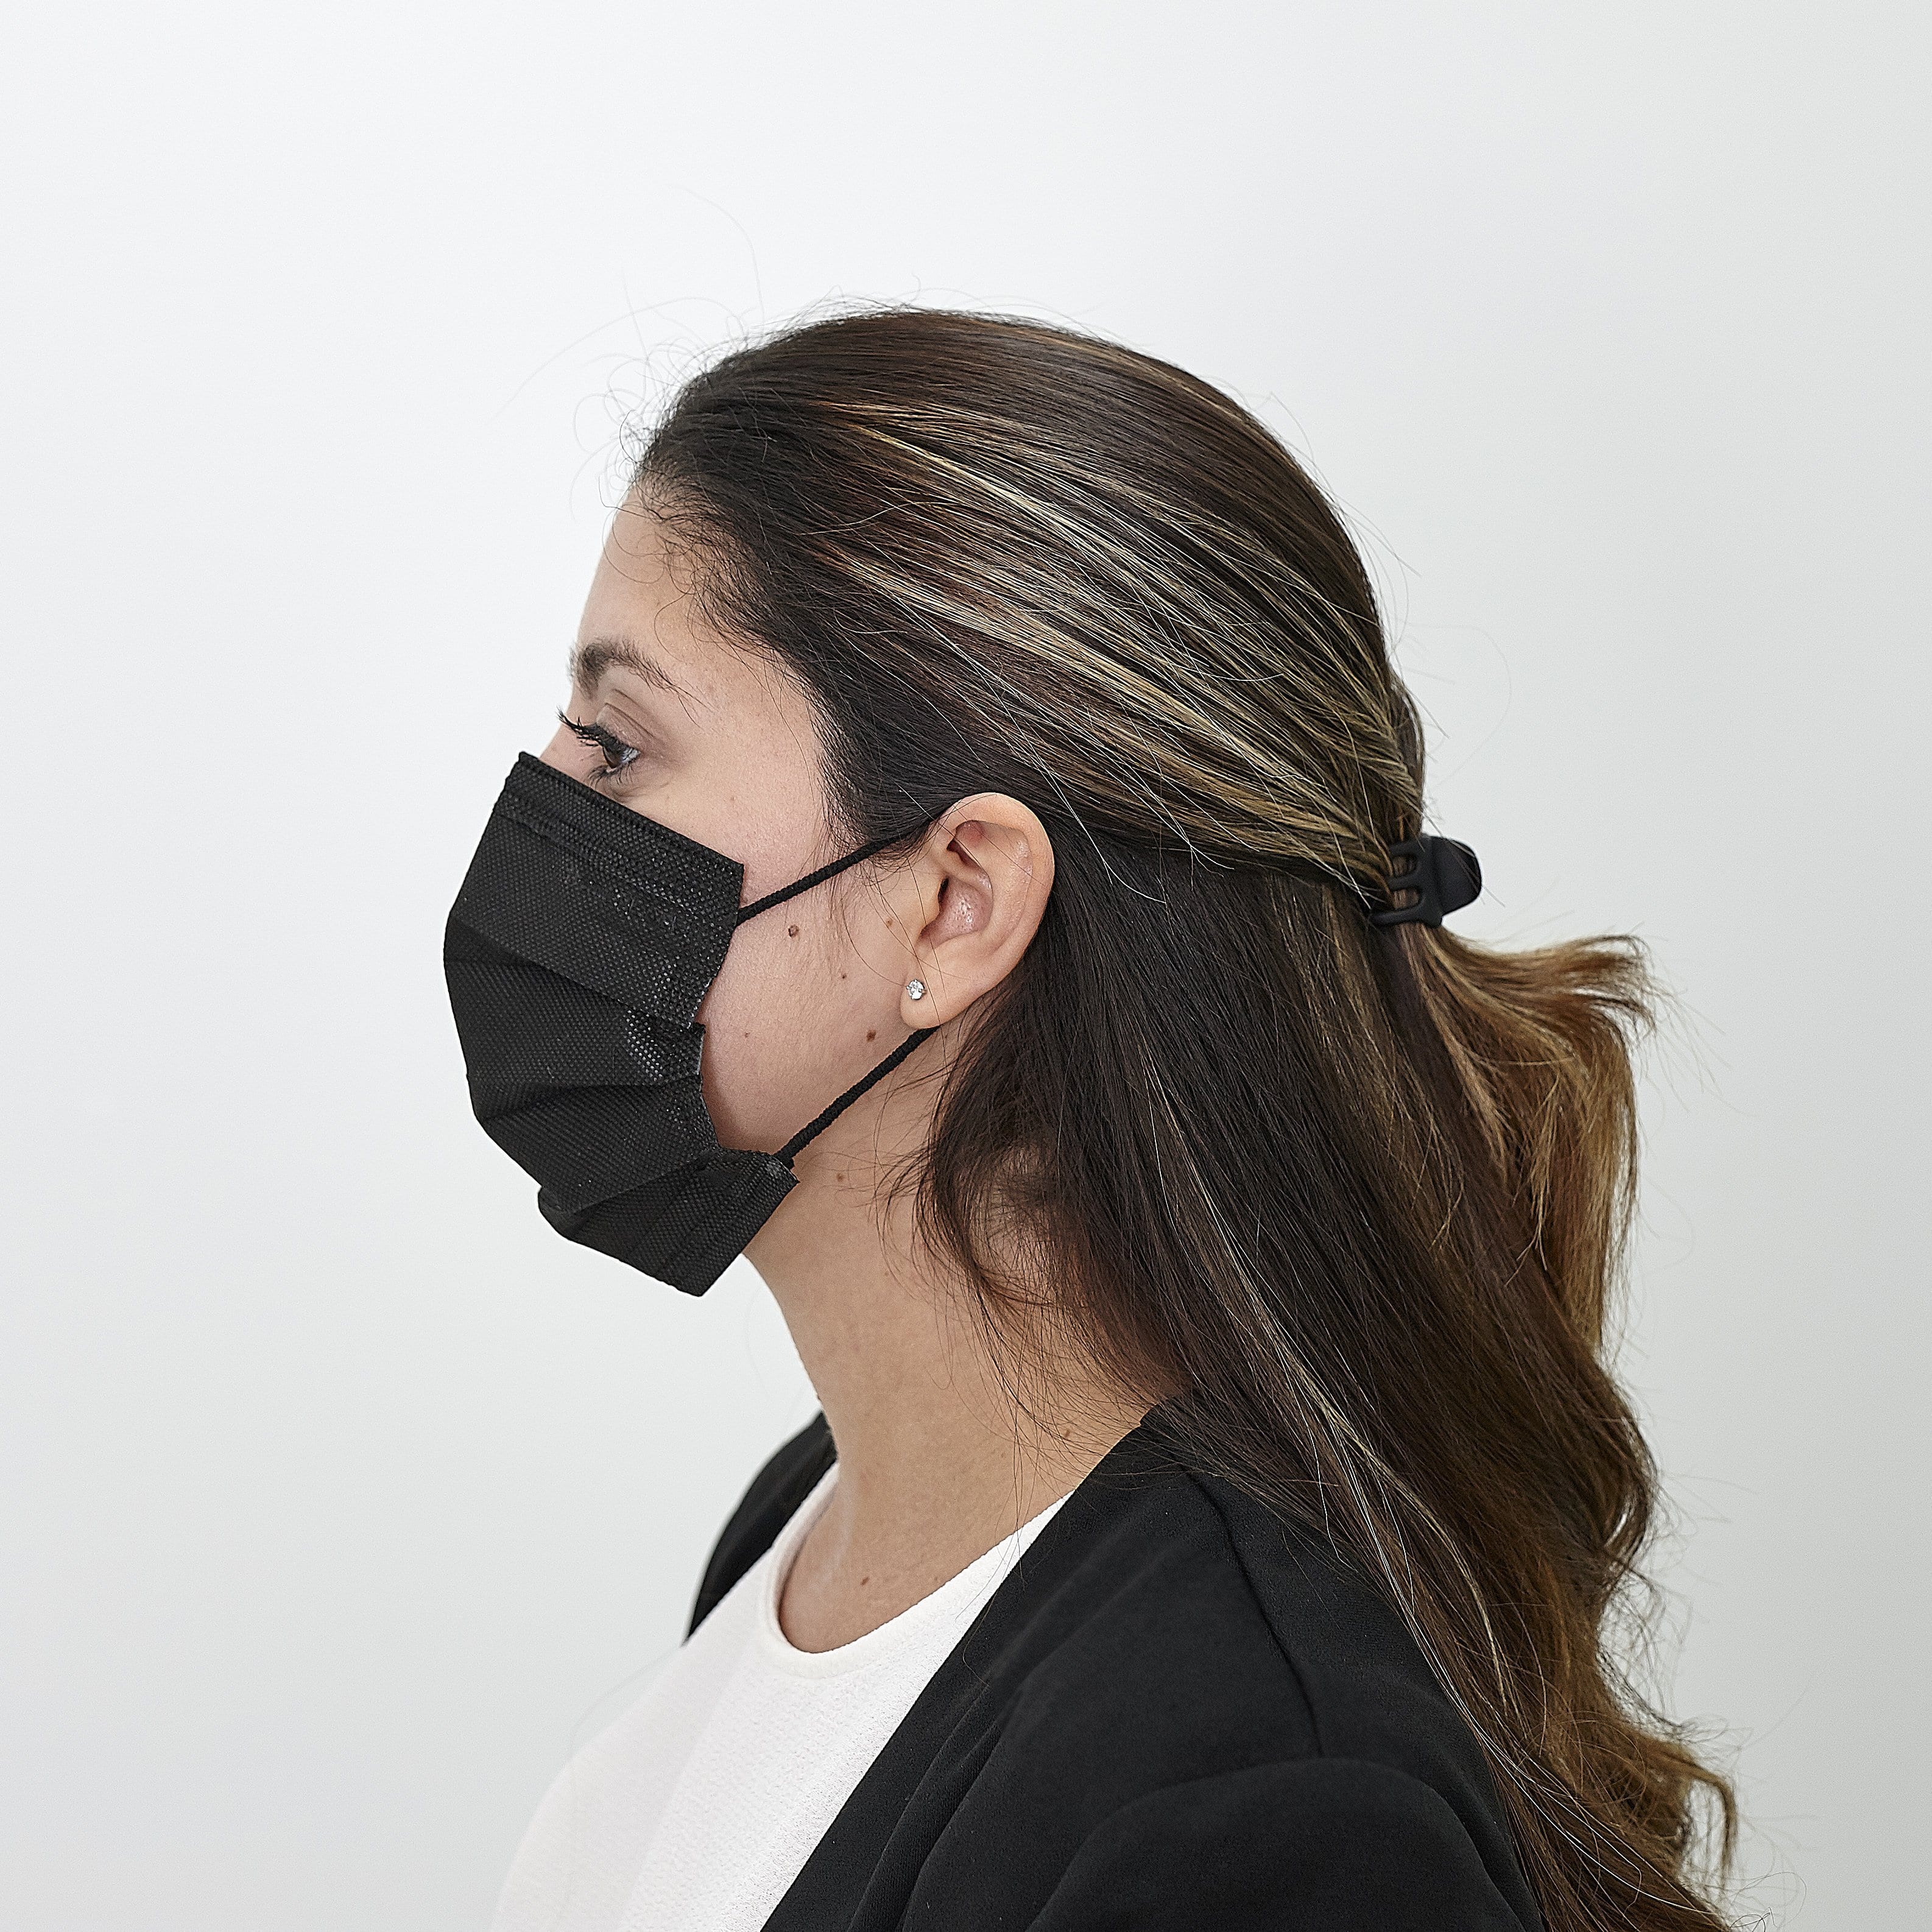 Black, ASTM Level 3 Disposable Face Mask with Earloops, (Case of 2,500)